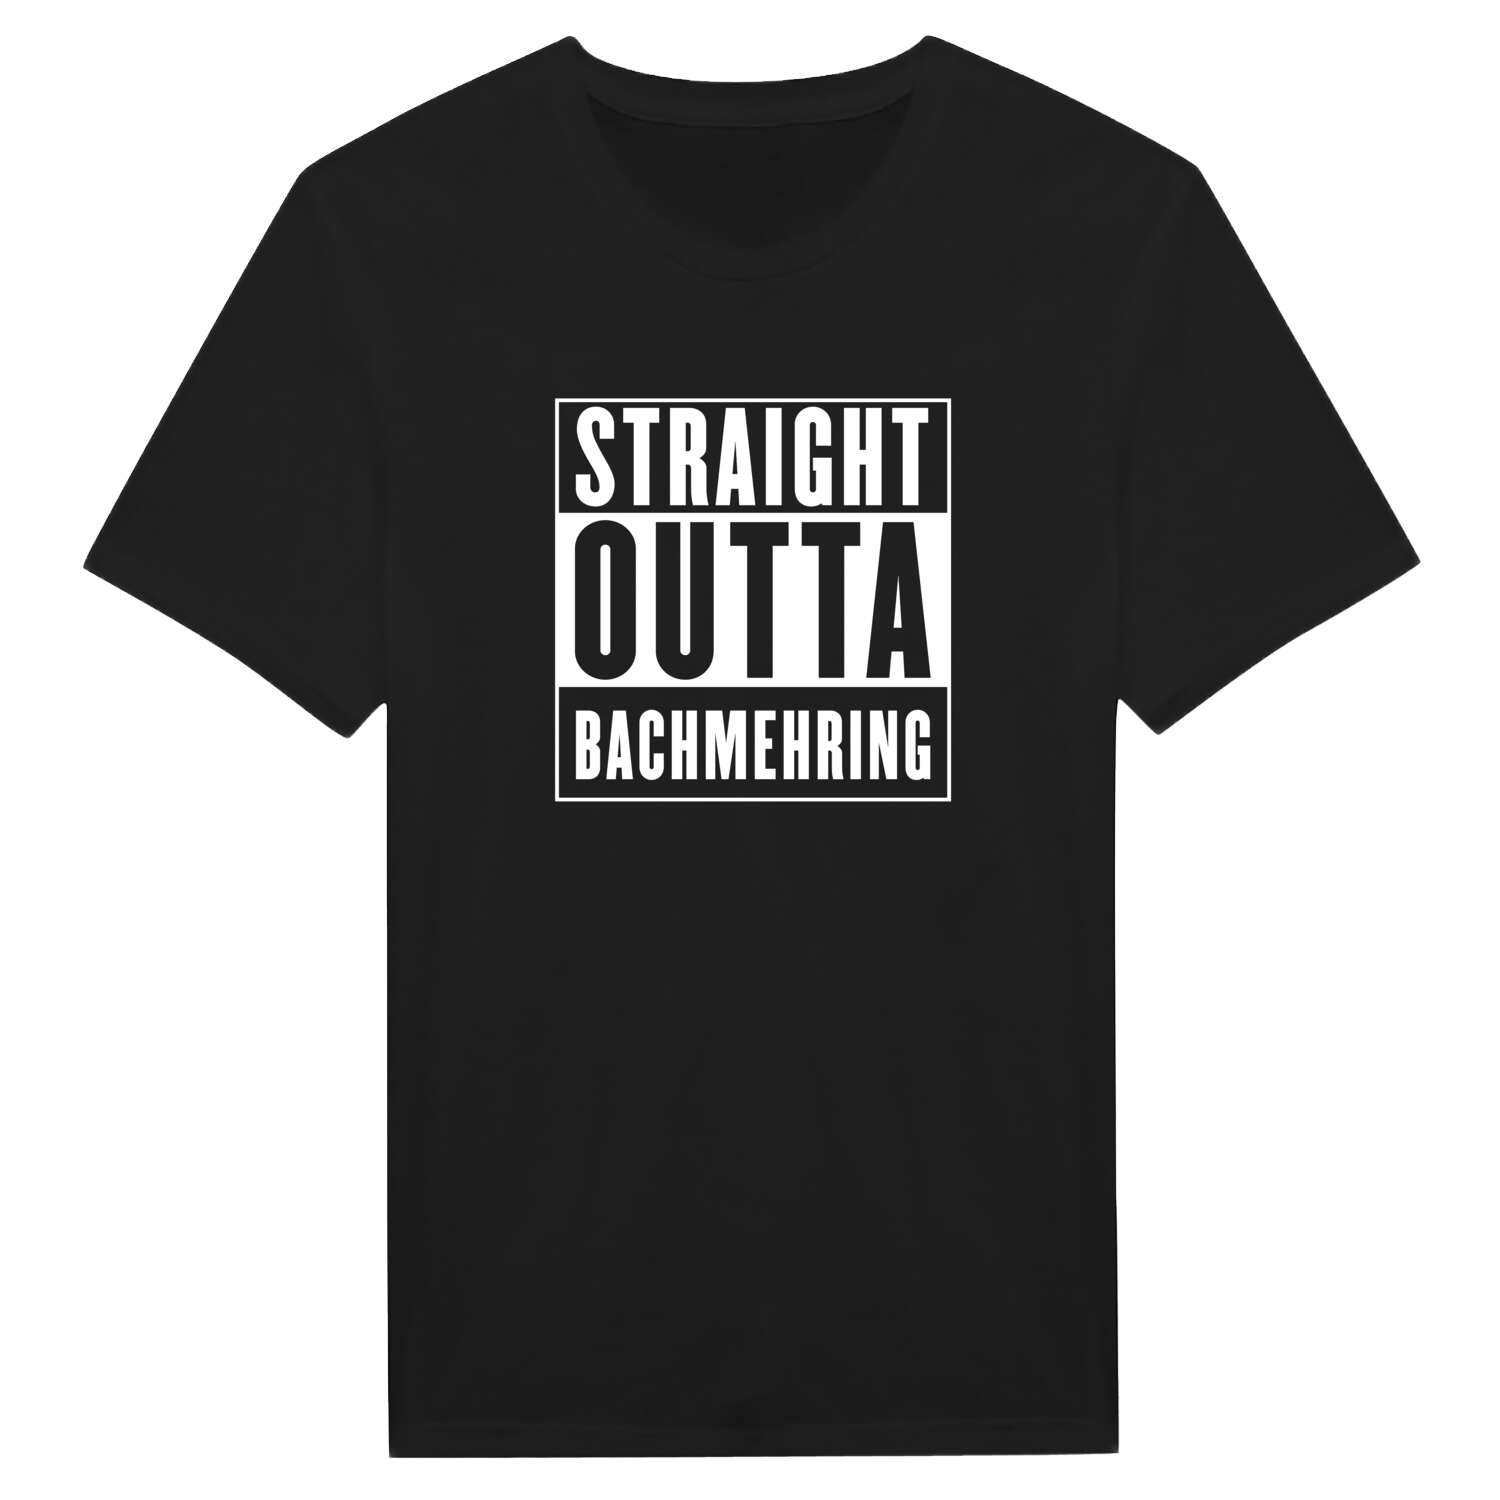 Bachmehring T-Shirt »Straight Outta«